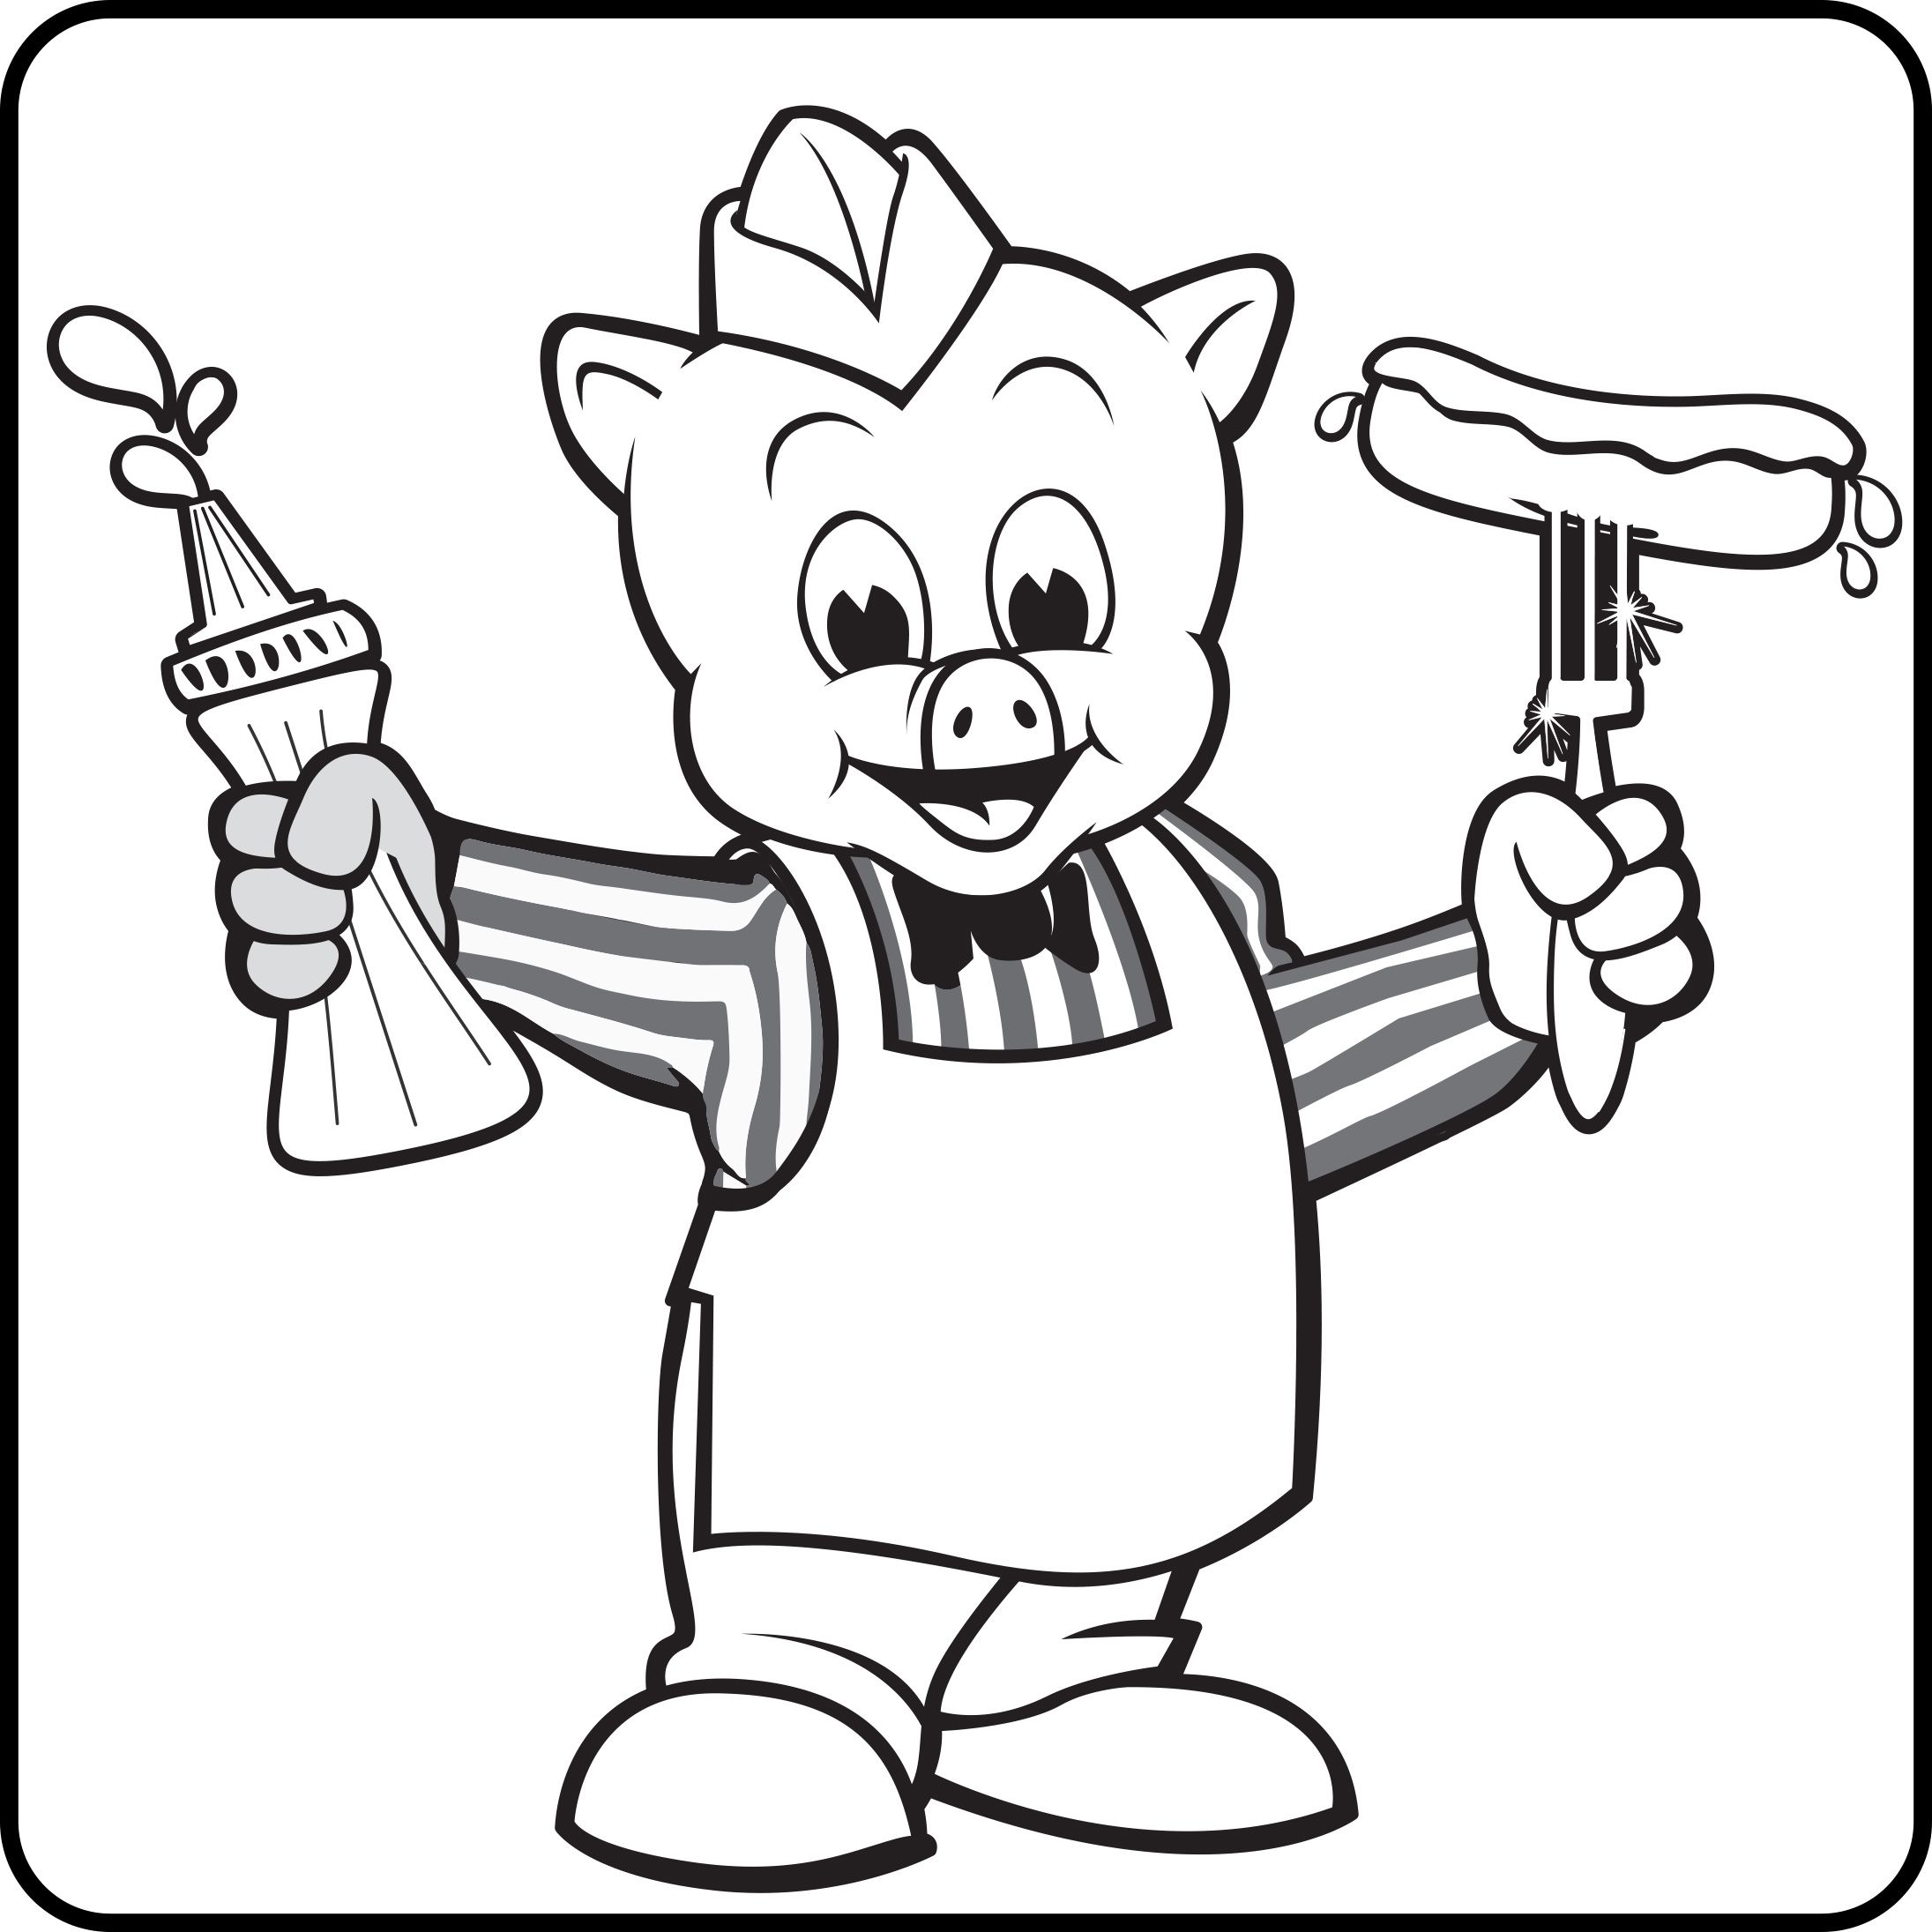 Piggly Wiggly Coloring Pages Sketch Coloring Page